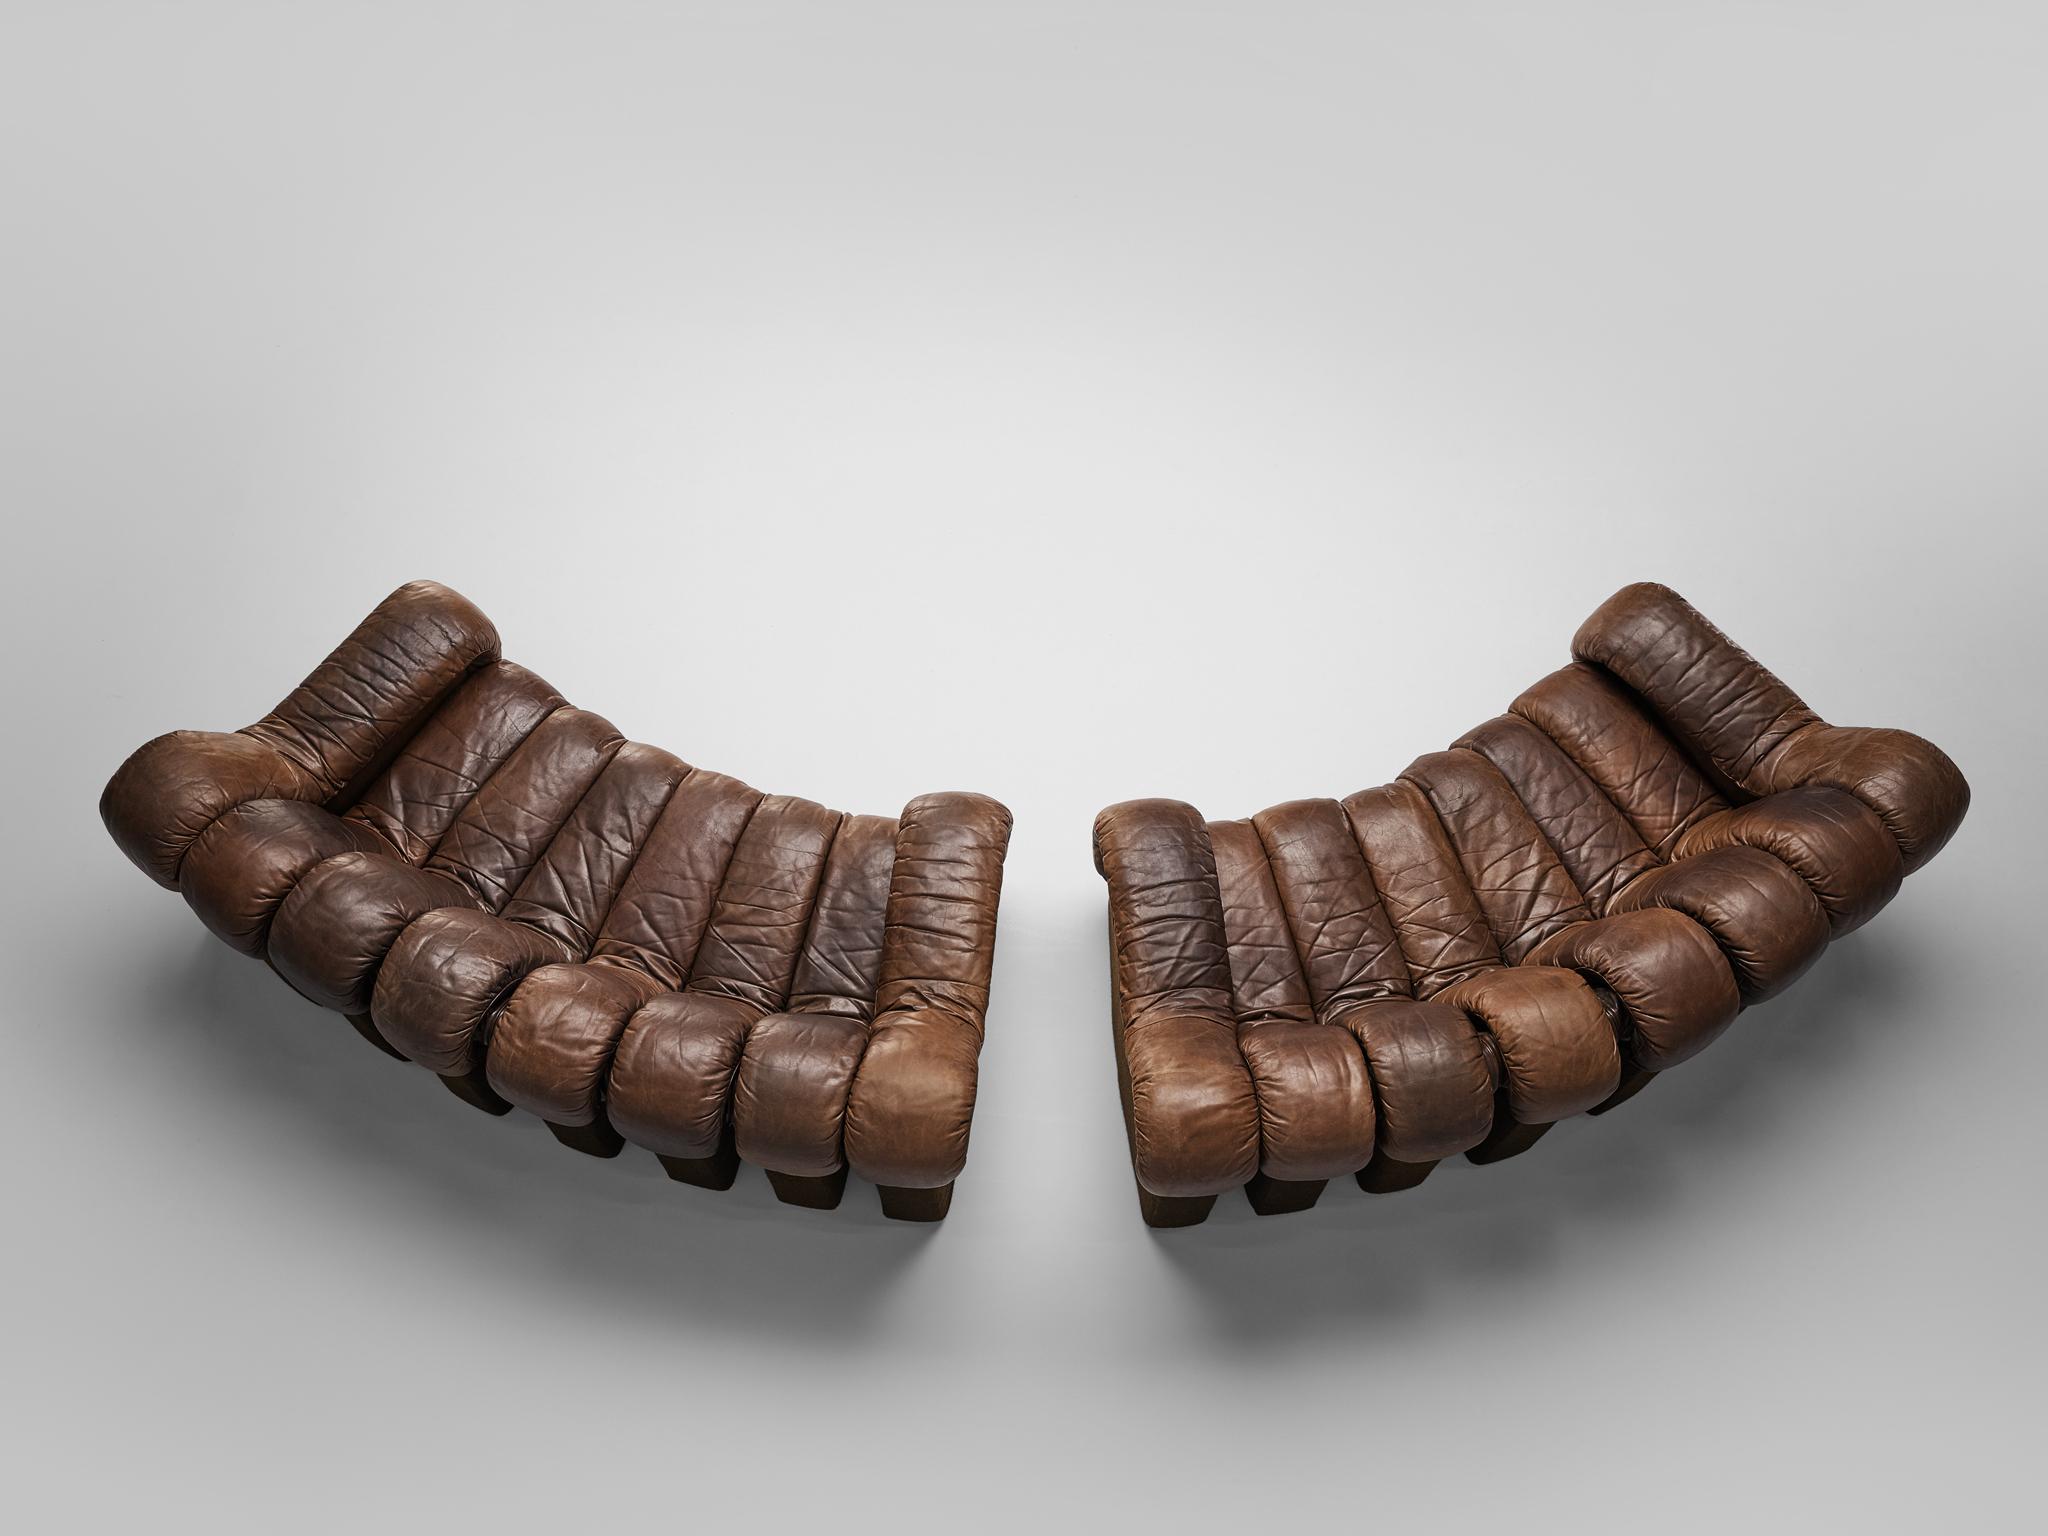 Pair of De Sede ‘Snake’ DS-600 sofas, brown leather, Switzerland, 1972.

A pair of two De Sede 'Snake' sofas in smooth brown leather. A design by Ueli Bergere, Elenora Peduzzi-Riva, Heinz Ulrich and Klaus Vogt at De Sede, Switzerland. De Sede 'Non